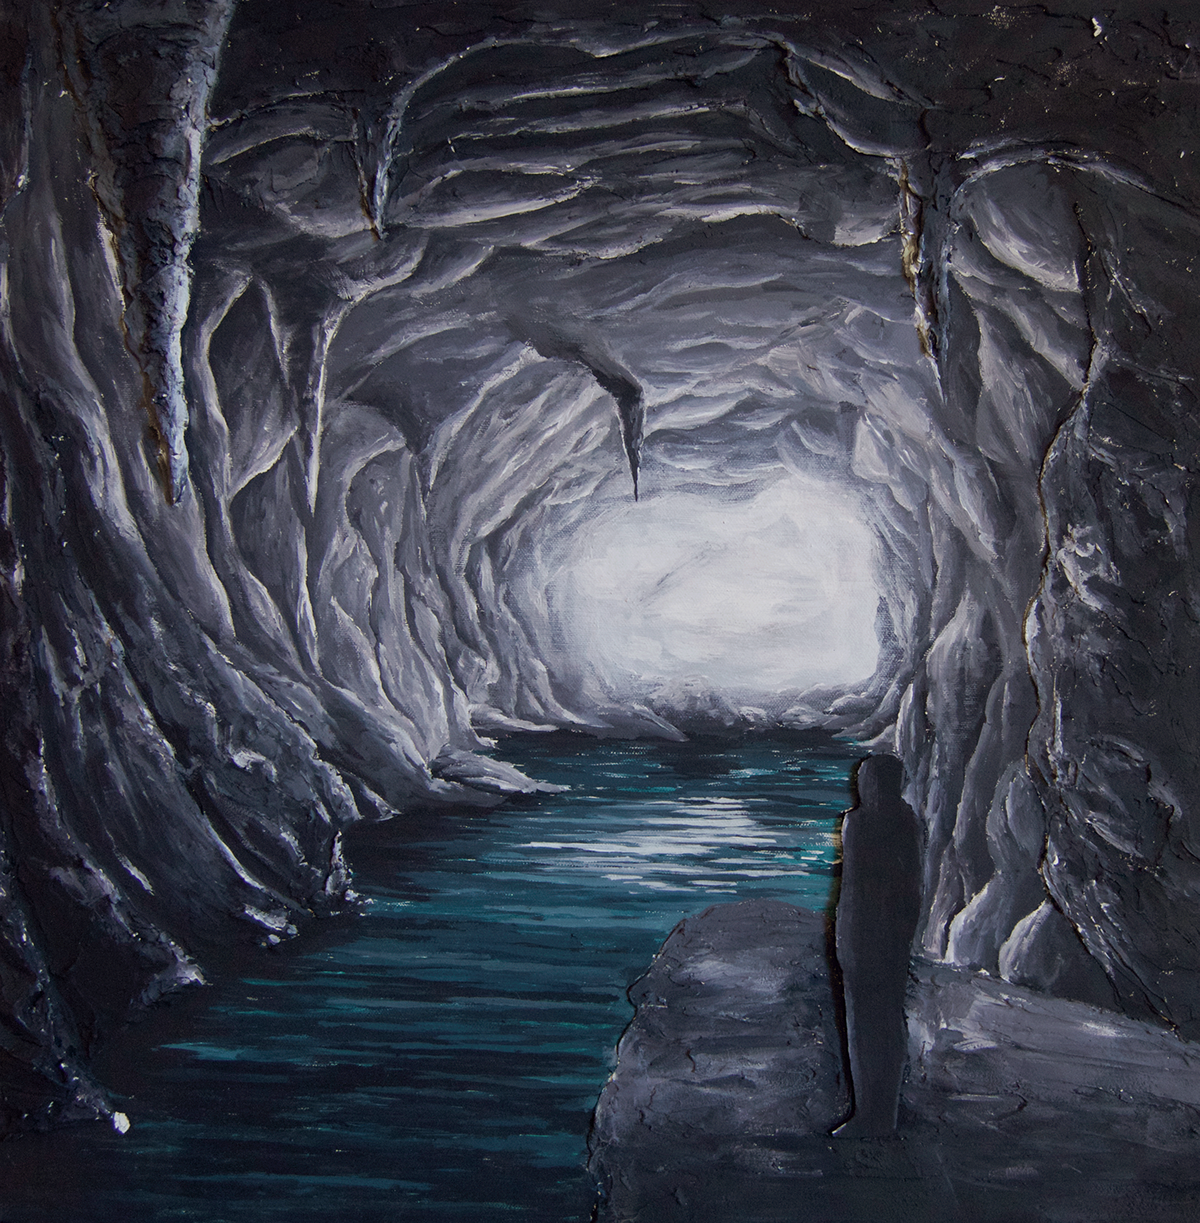 plaster plaster on canvas 3D painting Sculpt paint sculpt Caves lighting cool tones dark spooky Silhouette silhouette figure light and dark water Water Painting